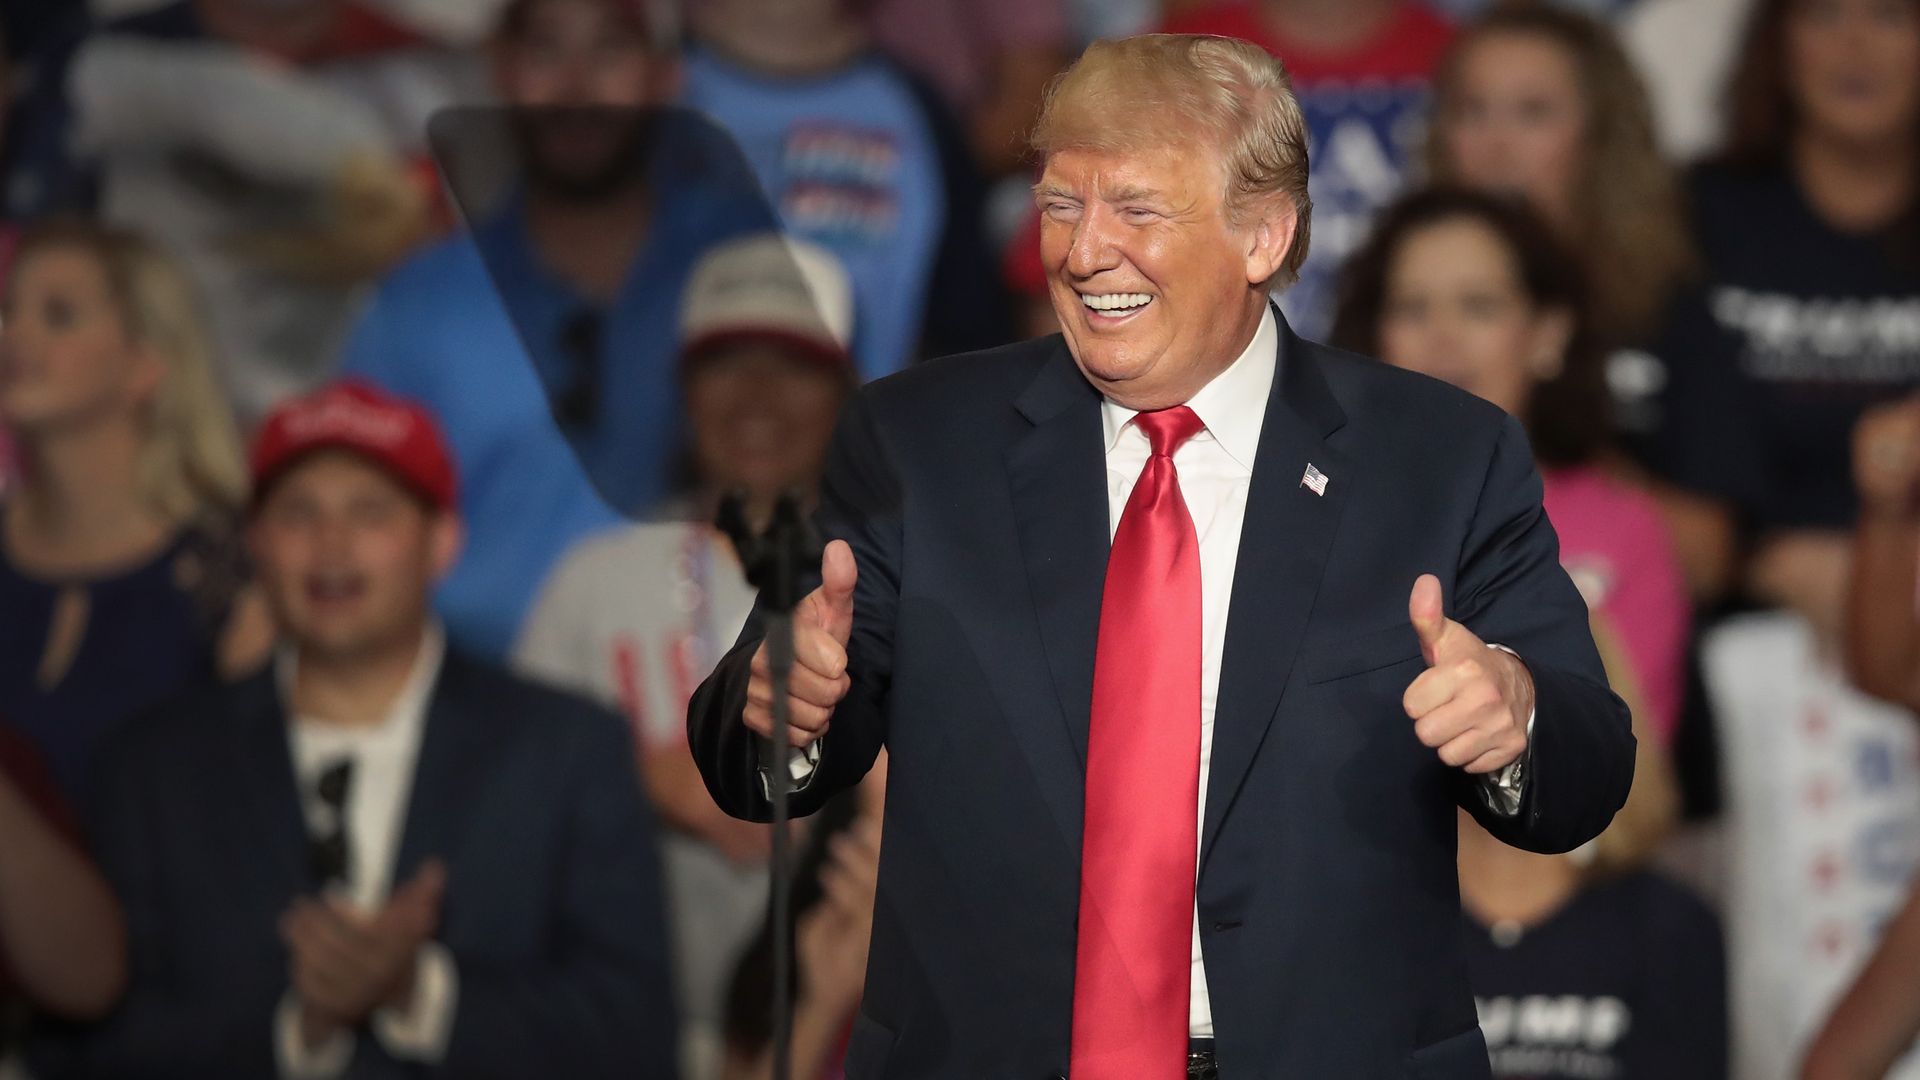 Trump smiles and puts two thumbs up at a rally